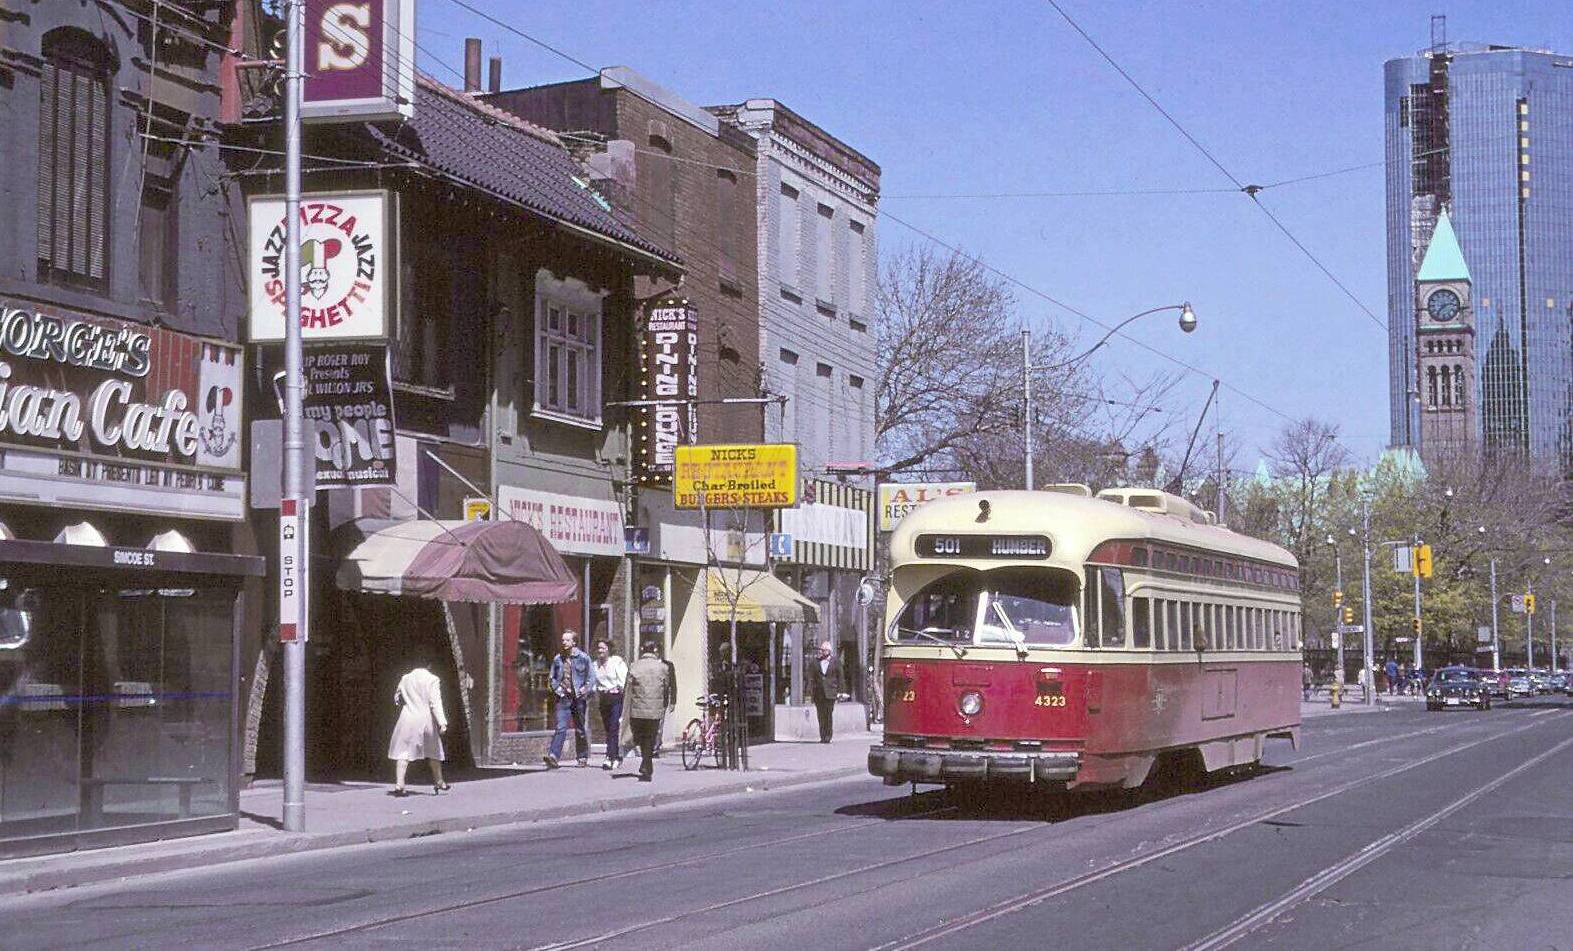 PHOTO - TORONTO - QUEEN STREET JUST W OF UNIVERSITY - LOOKING E - PCC STREETCAR - RESTAURANTS - OLD CITY HALL IN BACKGROUND - 1981